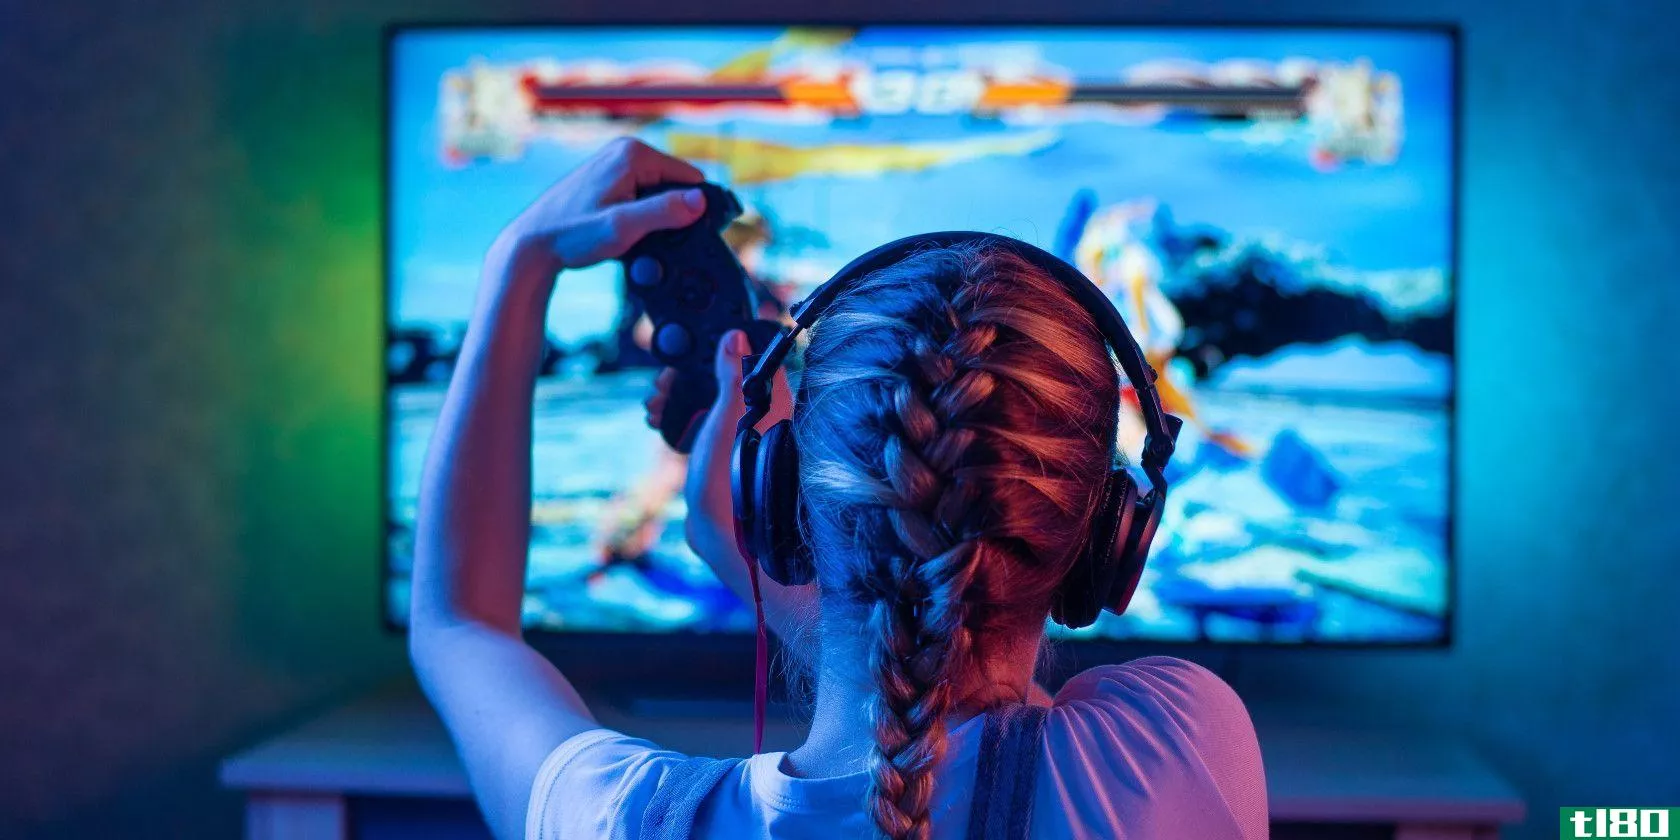 Girl streaming a video game on TV